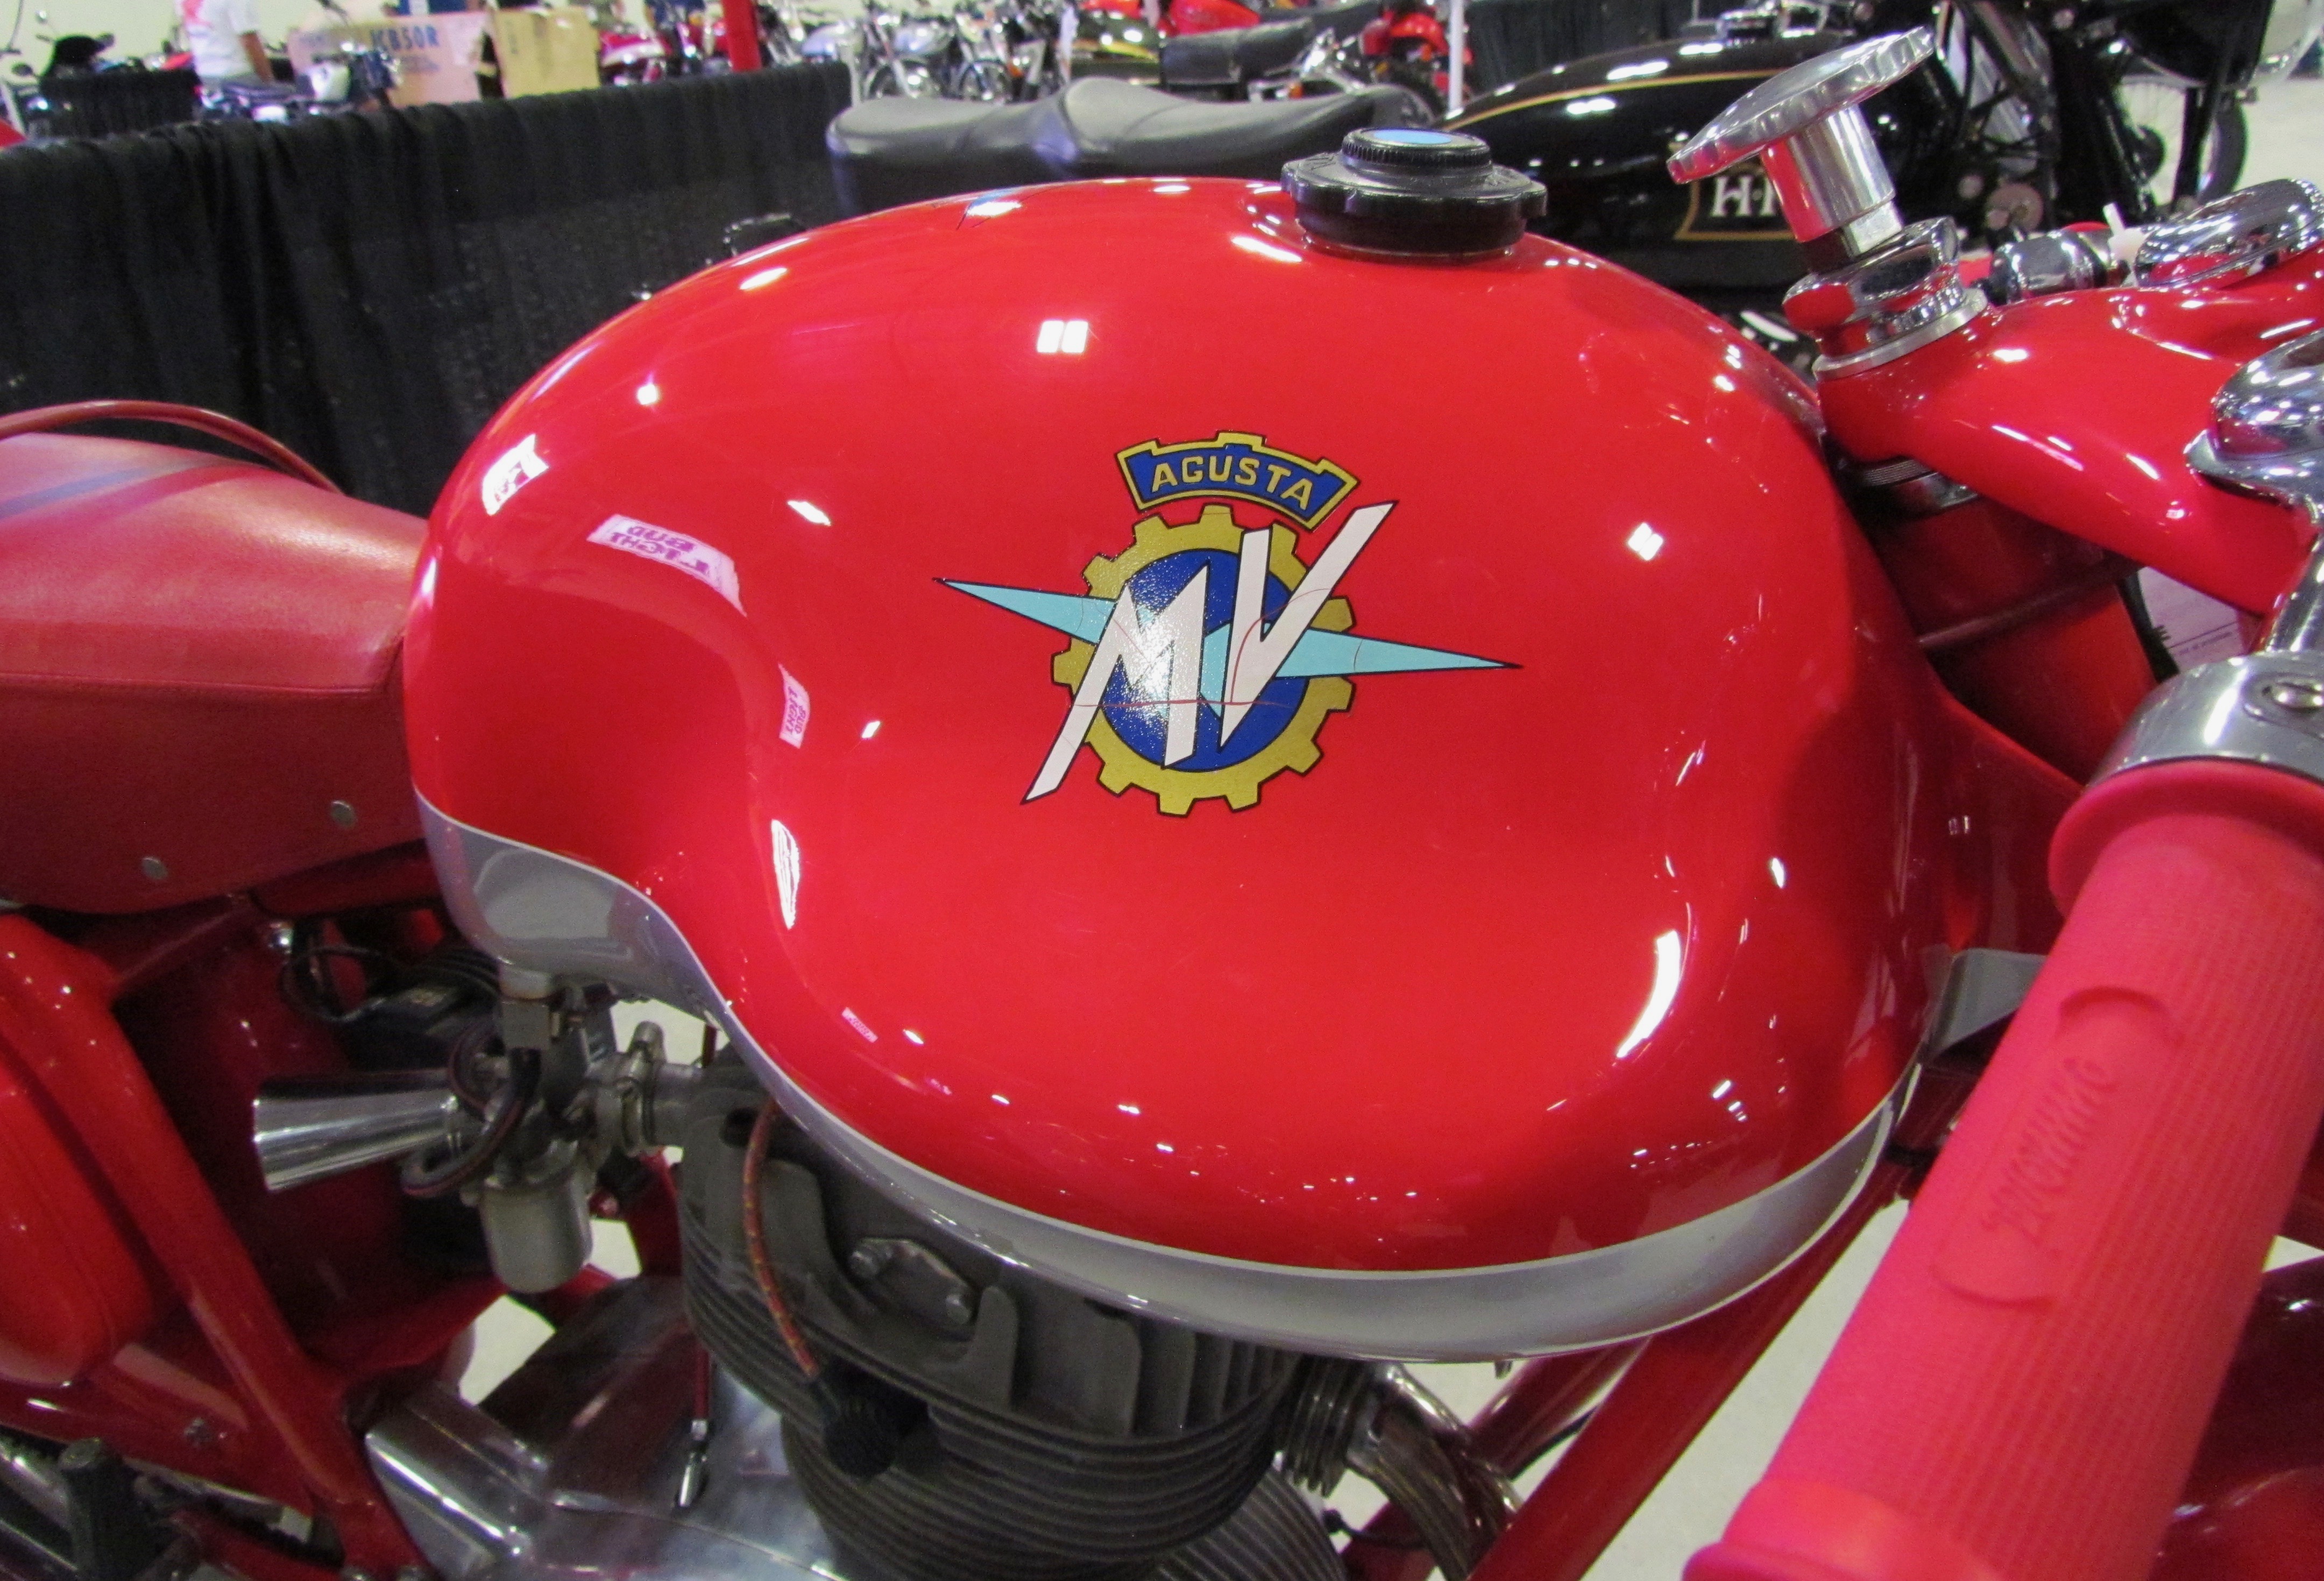 Mecum, Tanks for the memories: Mecum’s motorcycle auction a colorful showcase, ClassicCars.com Journal